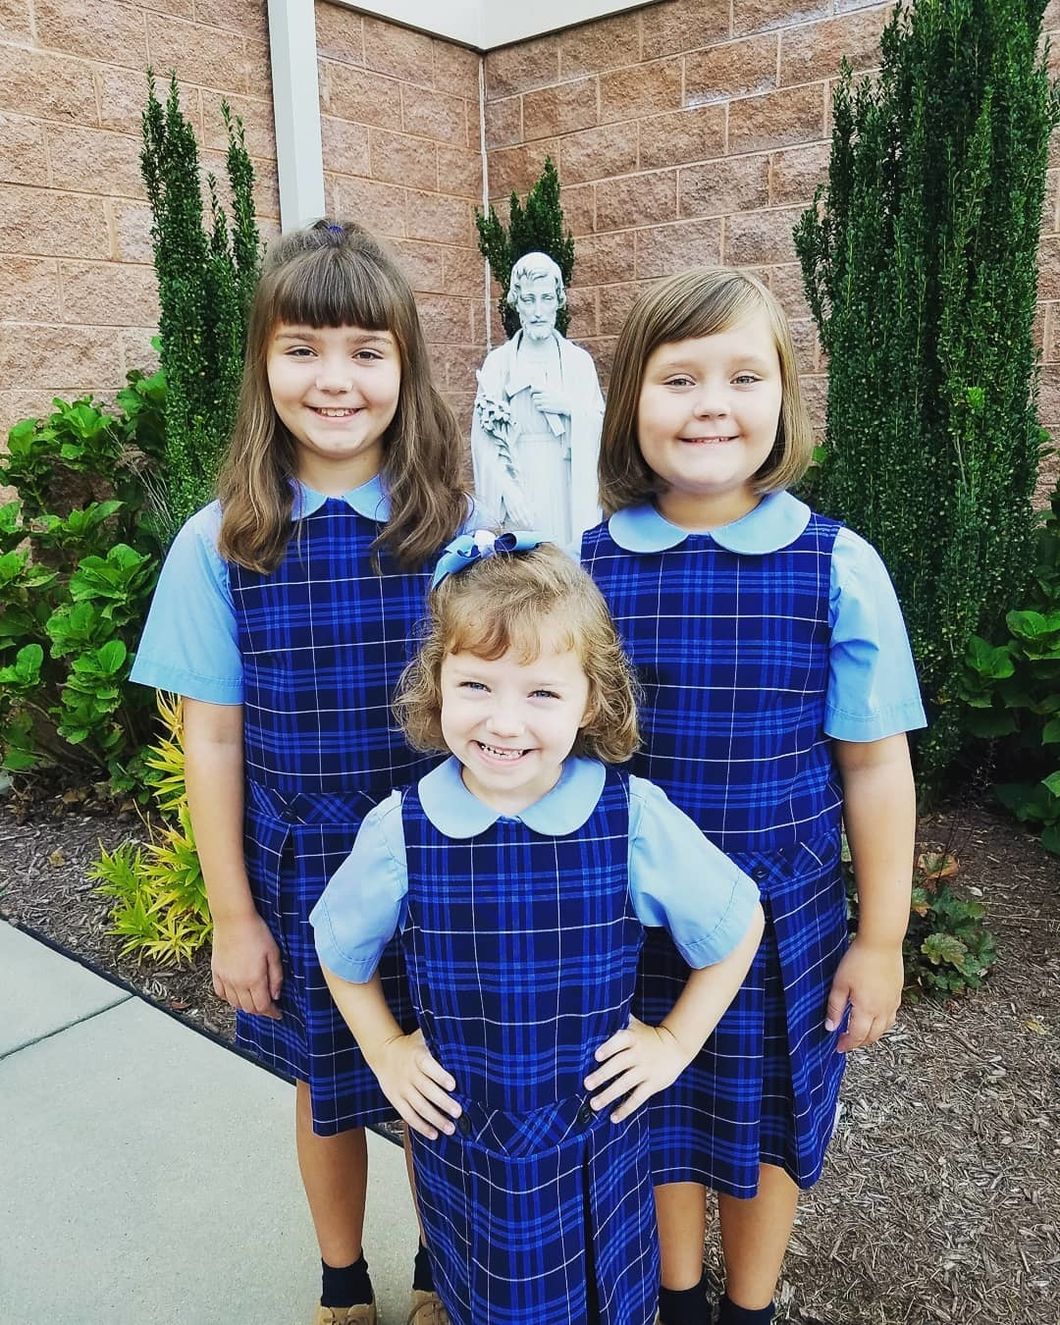 Attending A Catholic Elementary School Caused Me To Lose My Faith